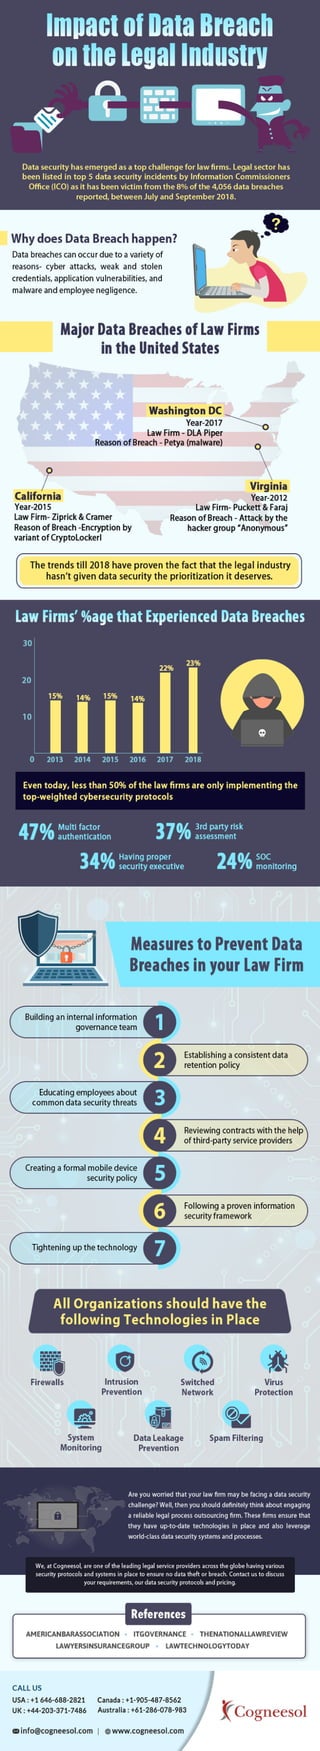 Impact of data breach on legal industry